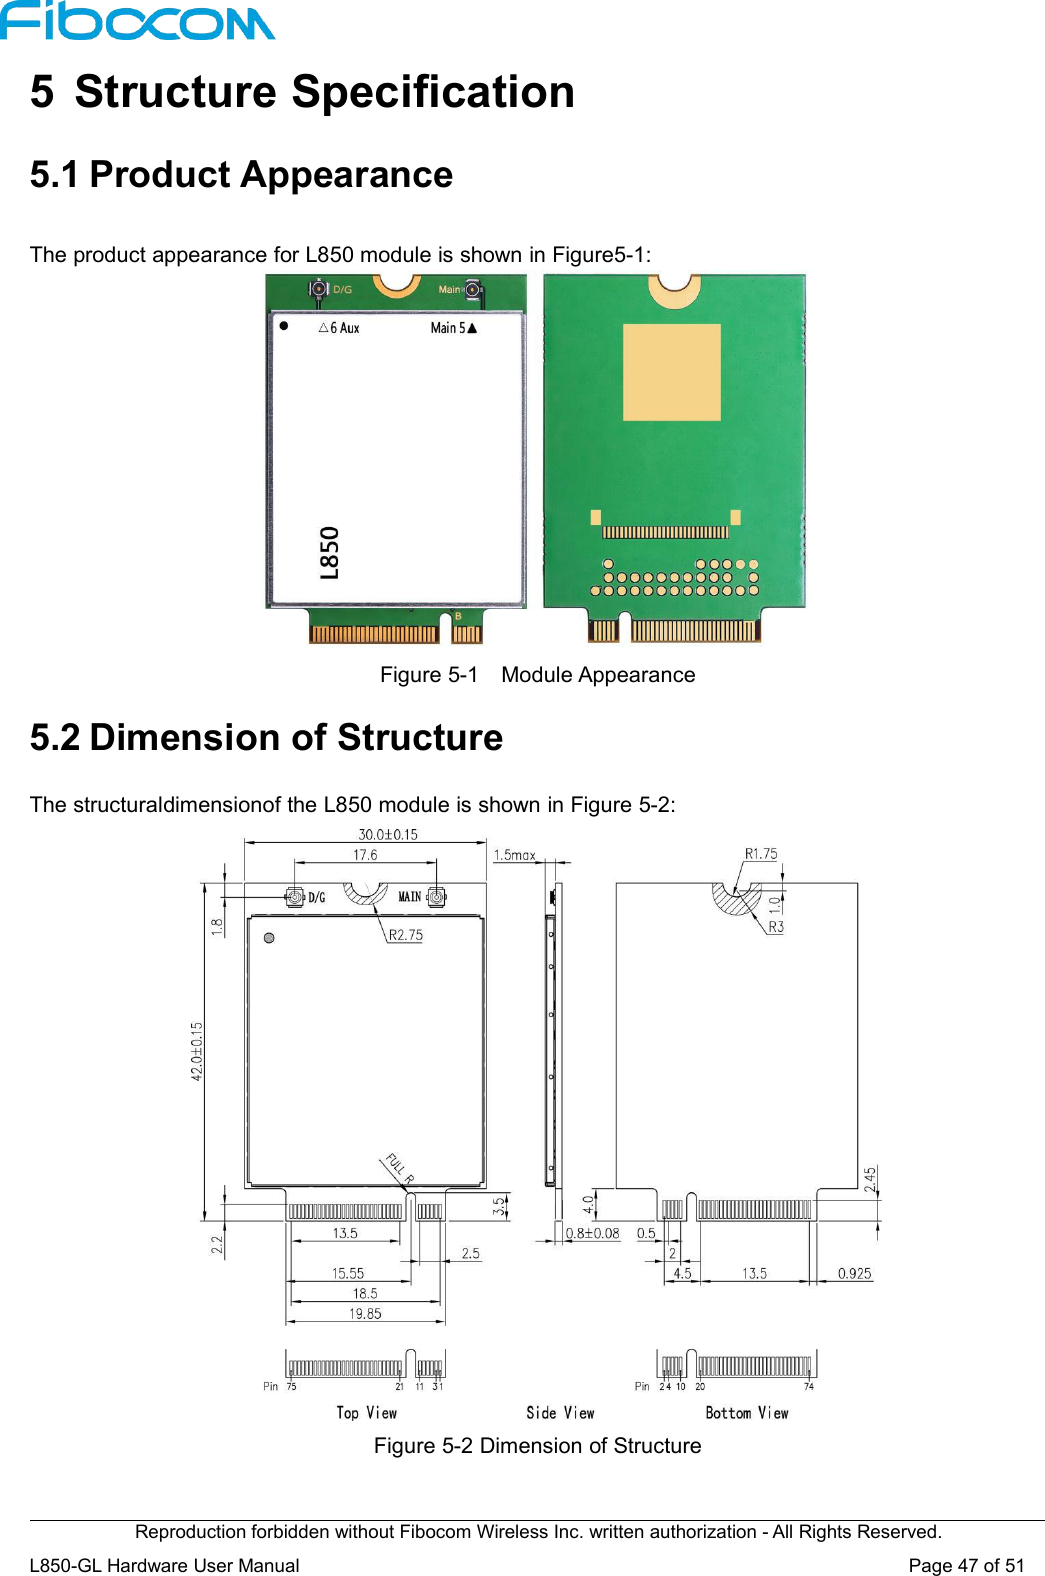 Reproduction forbidden without Fibocom Wireless Inc. written authorization - All Rights Reserved.L850-GL Hardware User Manual Page47of515 Structure Specification5.1 Product AppearanceThe product appearance for L850 module is shown in Figure5-1:Figure 5-1 Module Appearance5.2 Dimension of StructureThe structuraldimensionof the L850 module is shown in Figure 5-2:Figure 5-2 Dimension of Structure